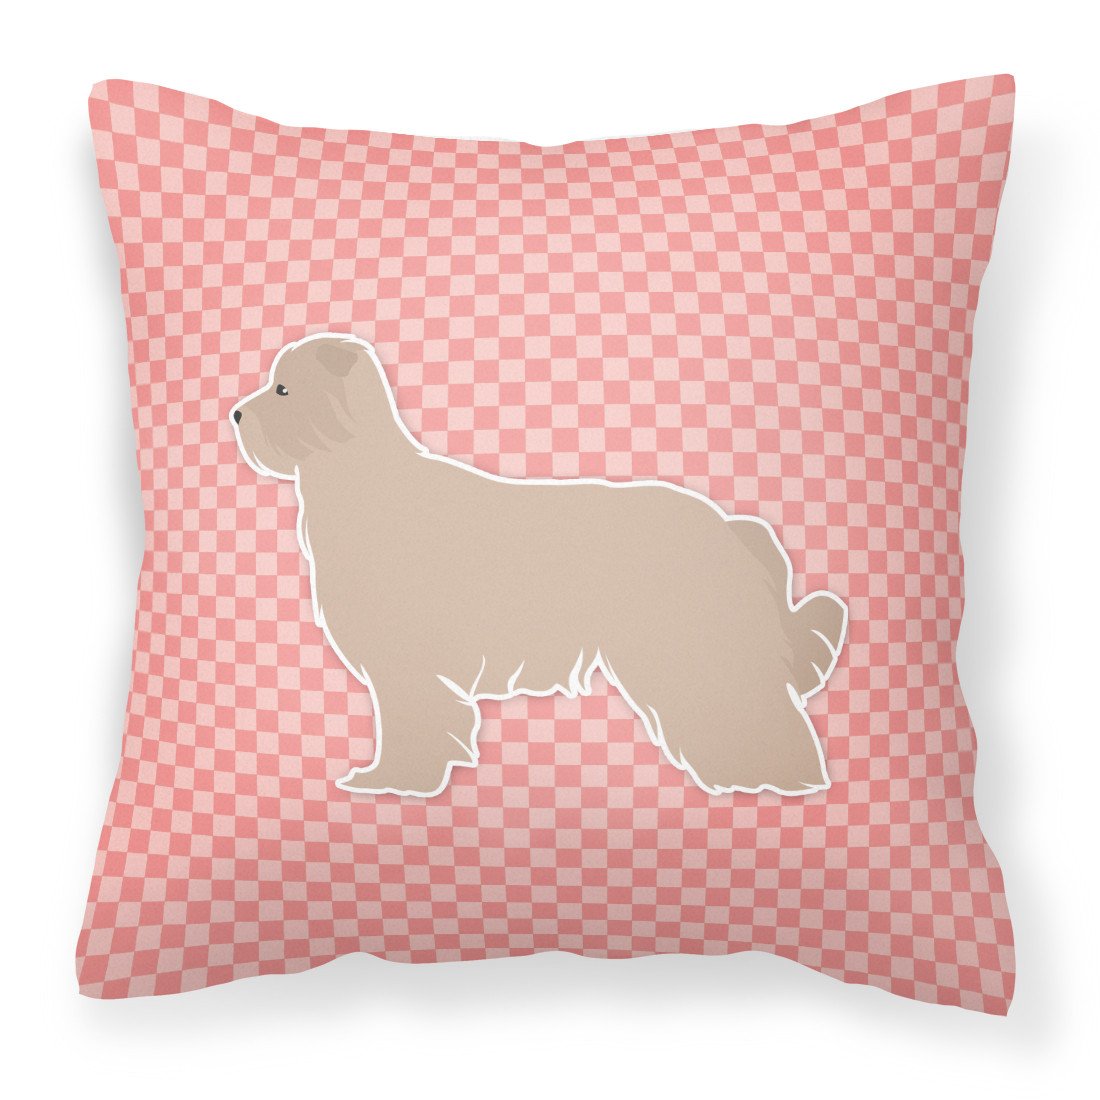 Pyrenean Shepherd Checkerboard Pink Fabric Decorative Pillow BB3618PW1818 by Caroline's Treasures